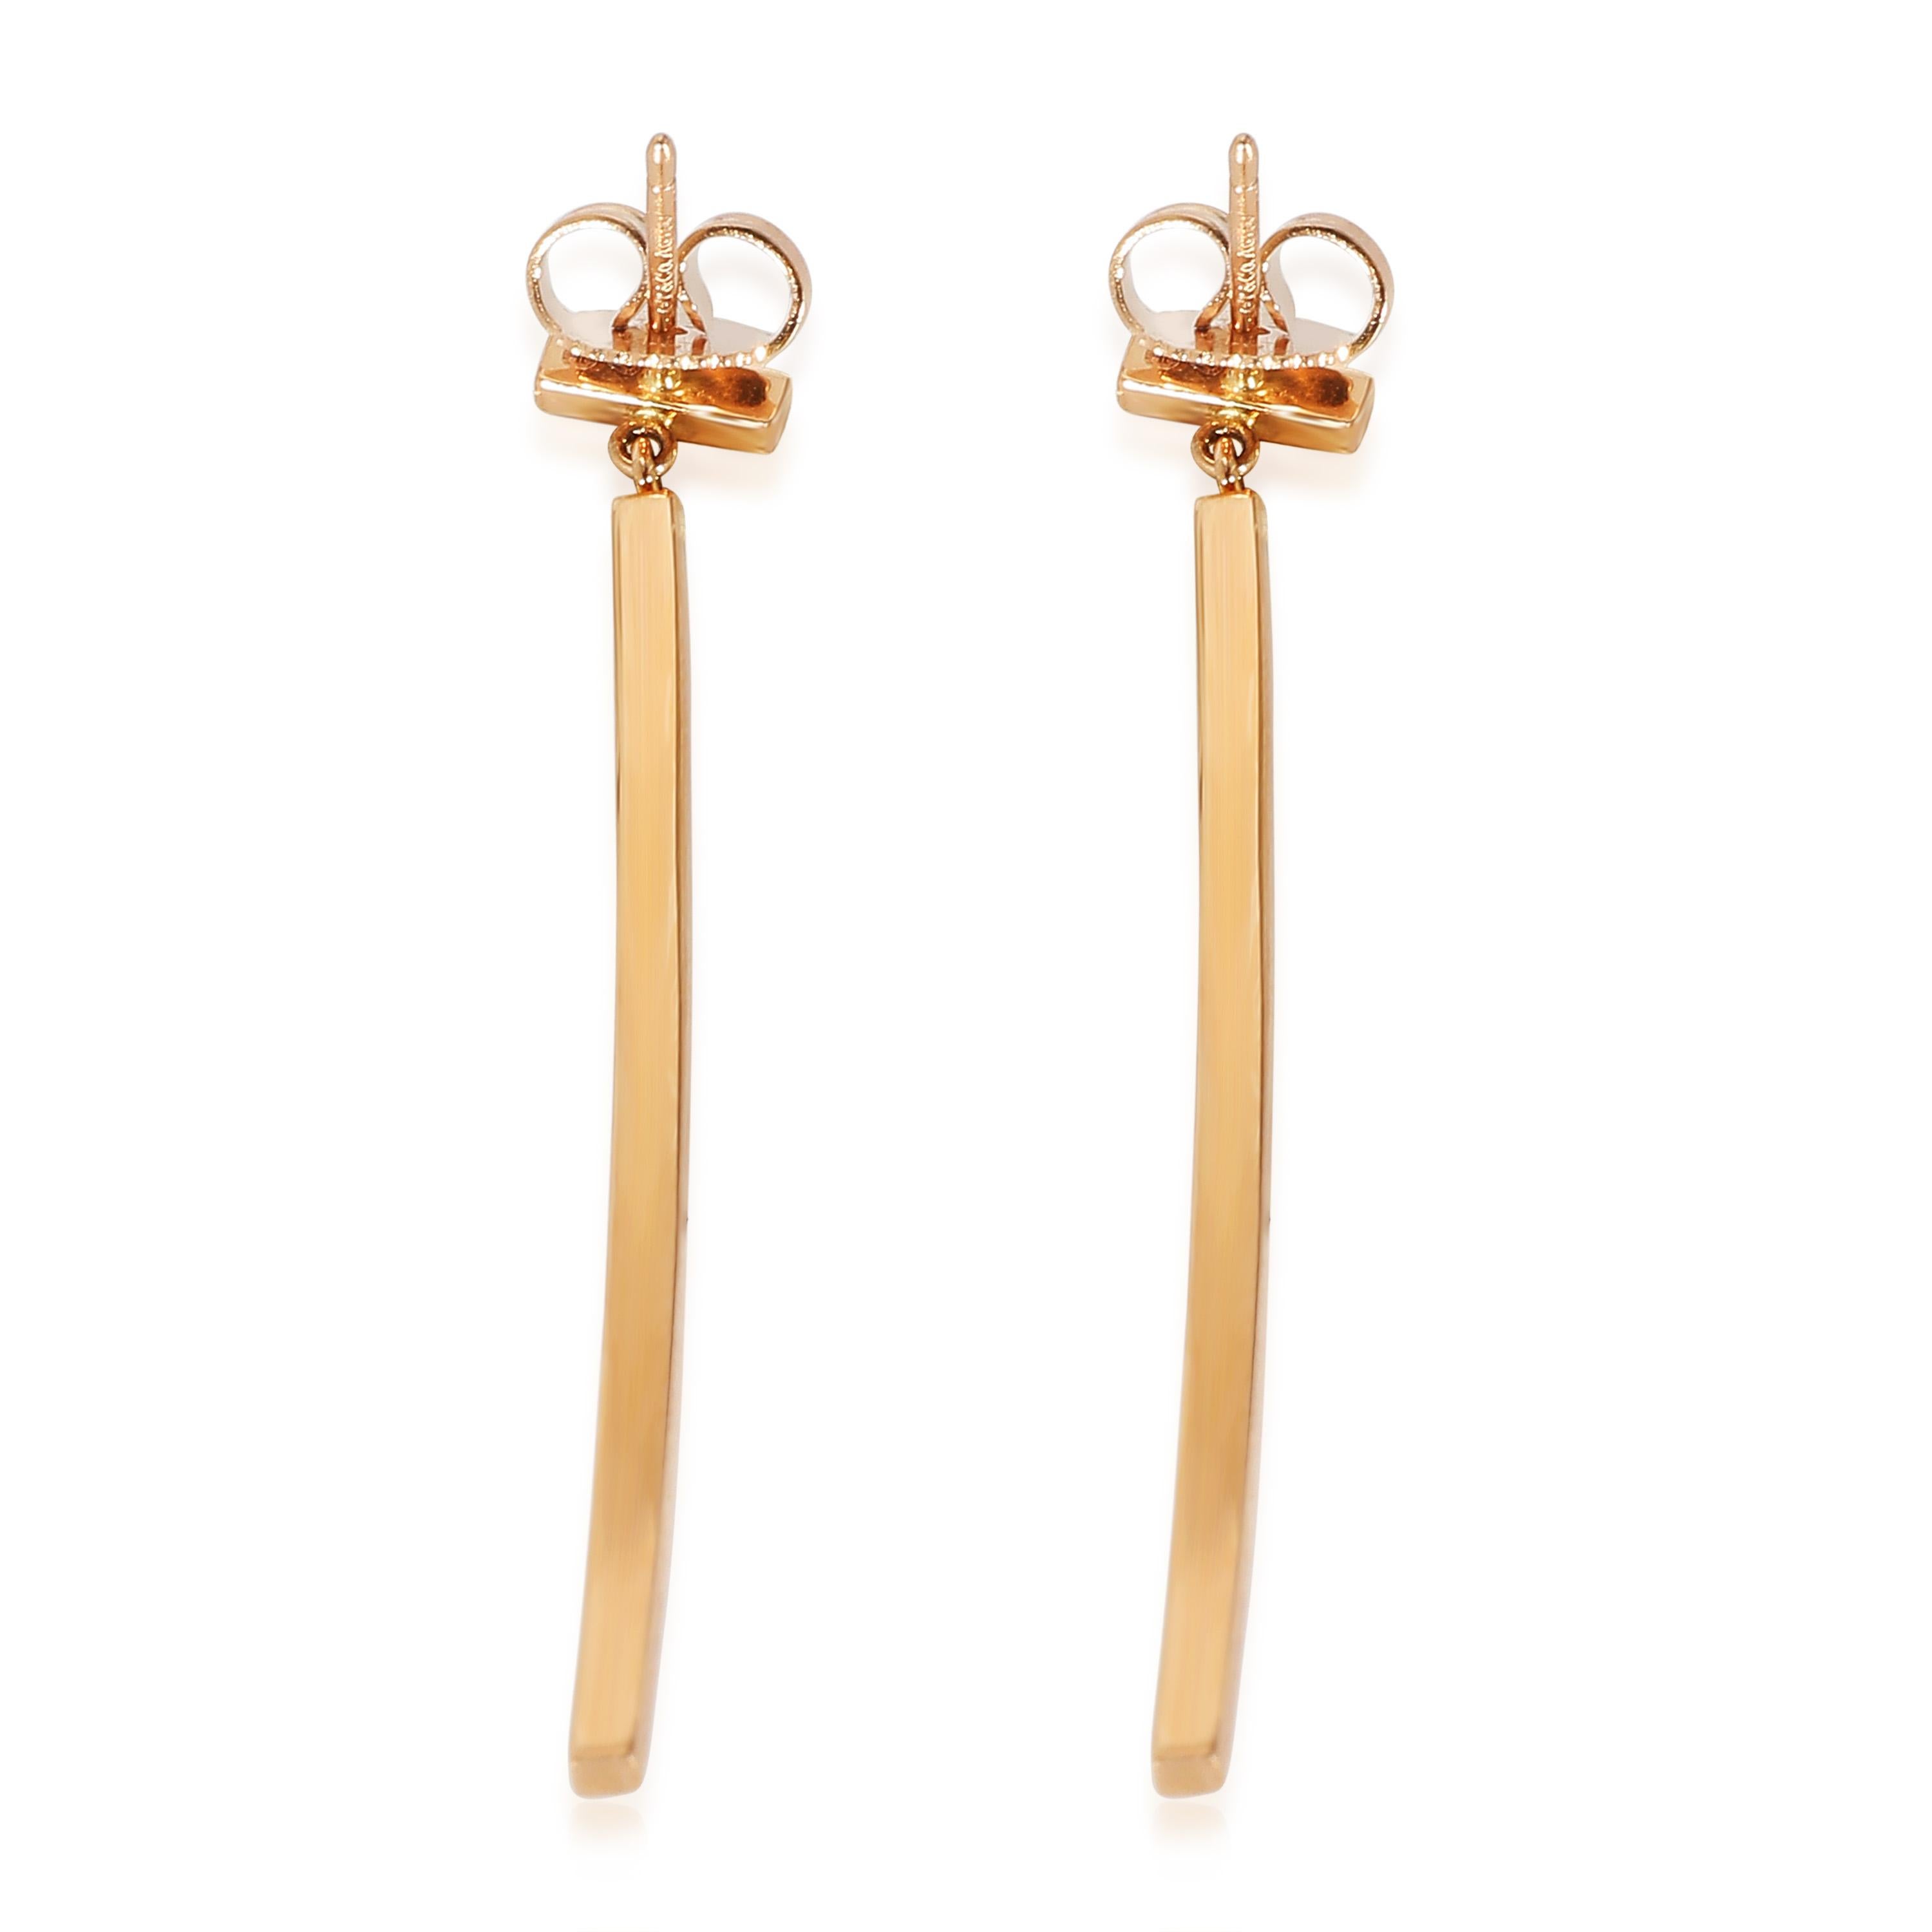 Tiffany & Co. Tiffany T Bar Earrings in 18k Rose Gold

PRIMARY DETAILS
SKU: 132594
Listing Title: Tiffany & Co. Tiffany T Bar Earrings in 18k Rose Gold
Condition Description: Inspired by the 'T' motif that Tiffany has been incorporating since the